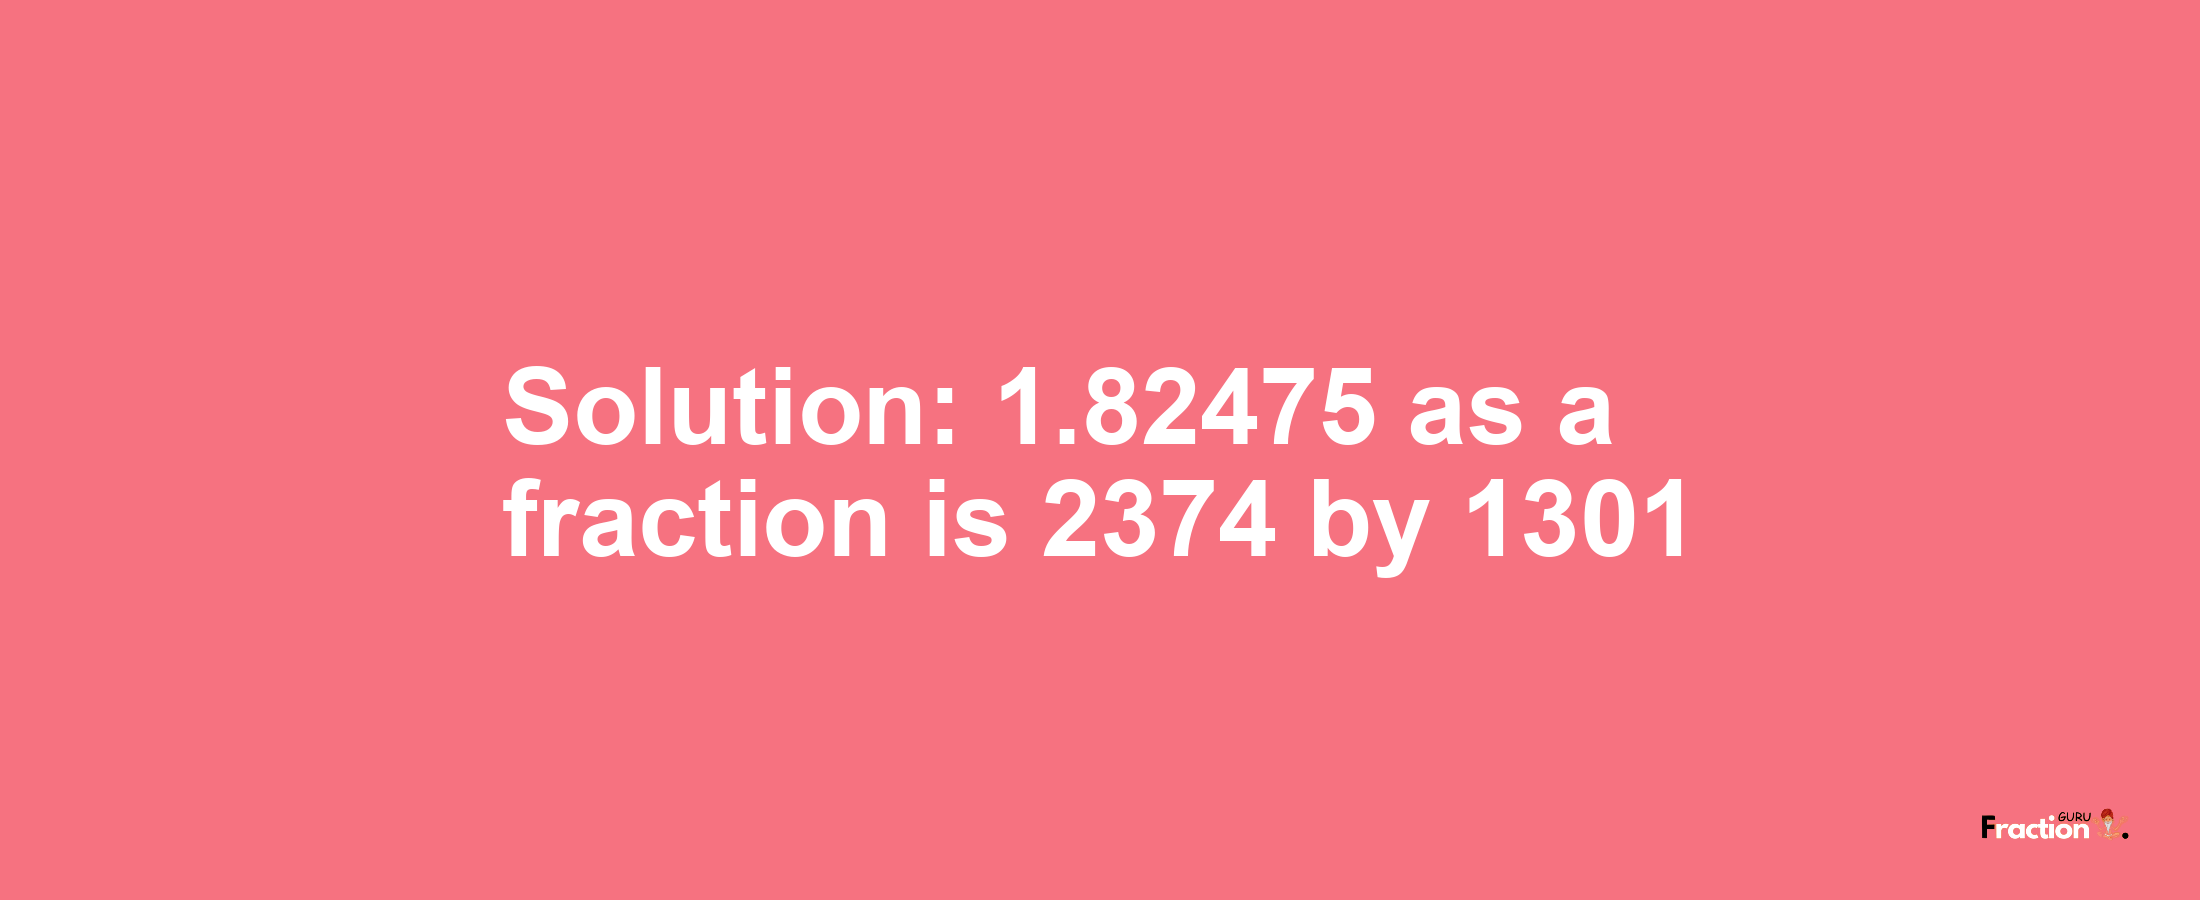 Solution:1.82475 as a fraction is 2374/1301